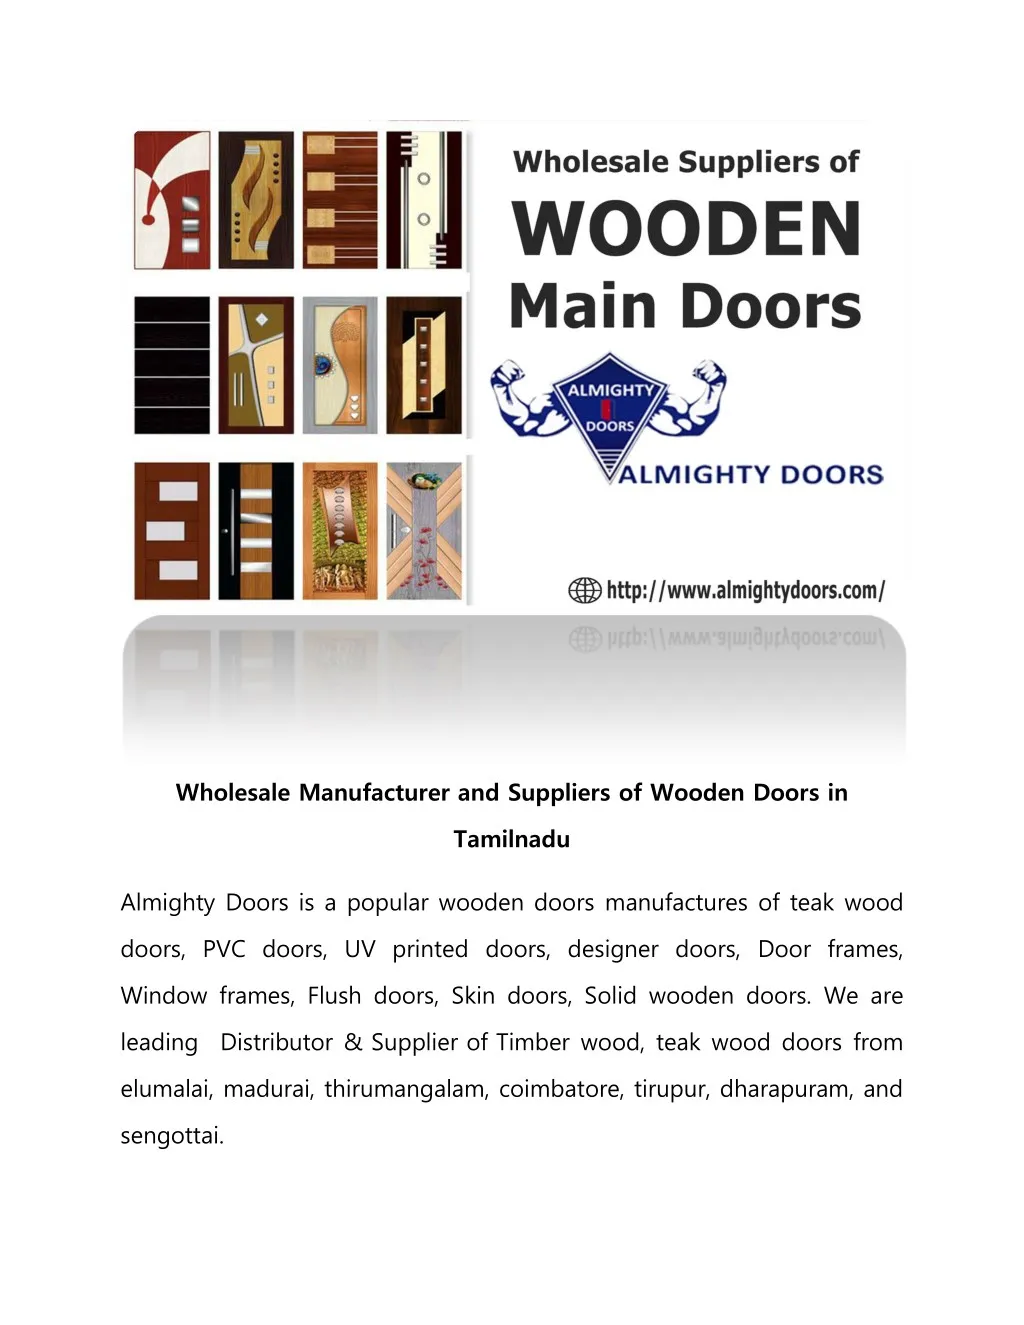 wholesale manufacturer and suppliers of wooden